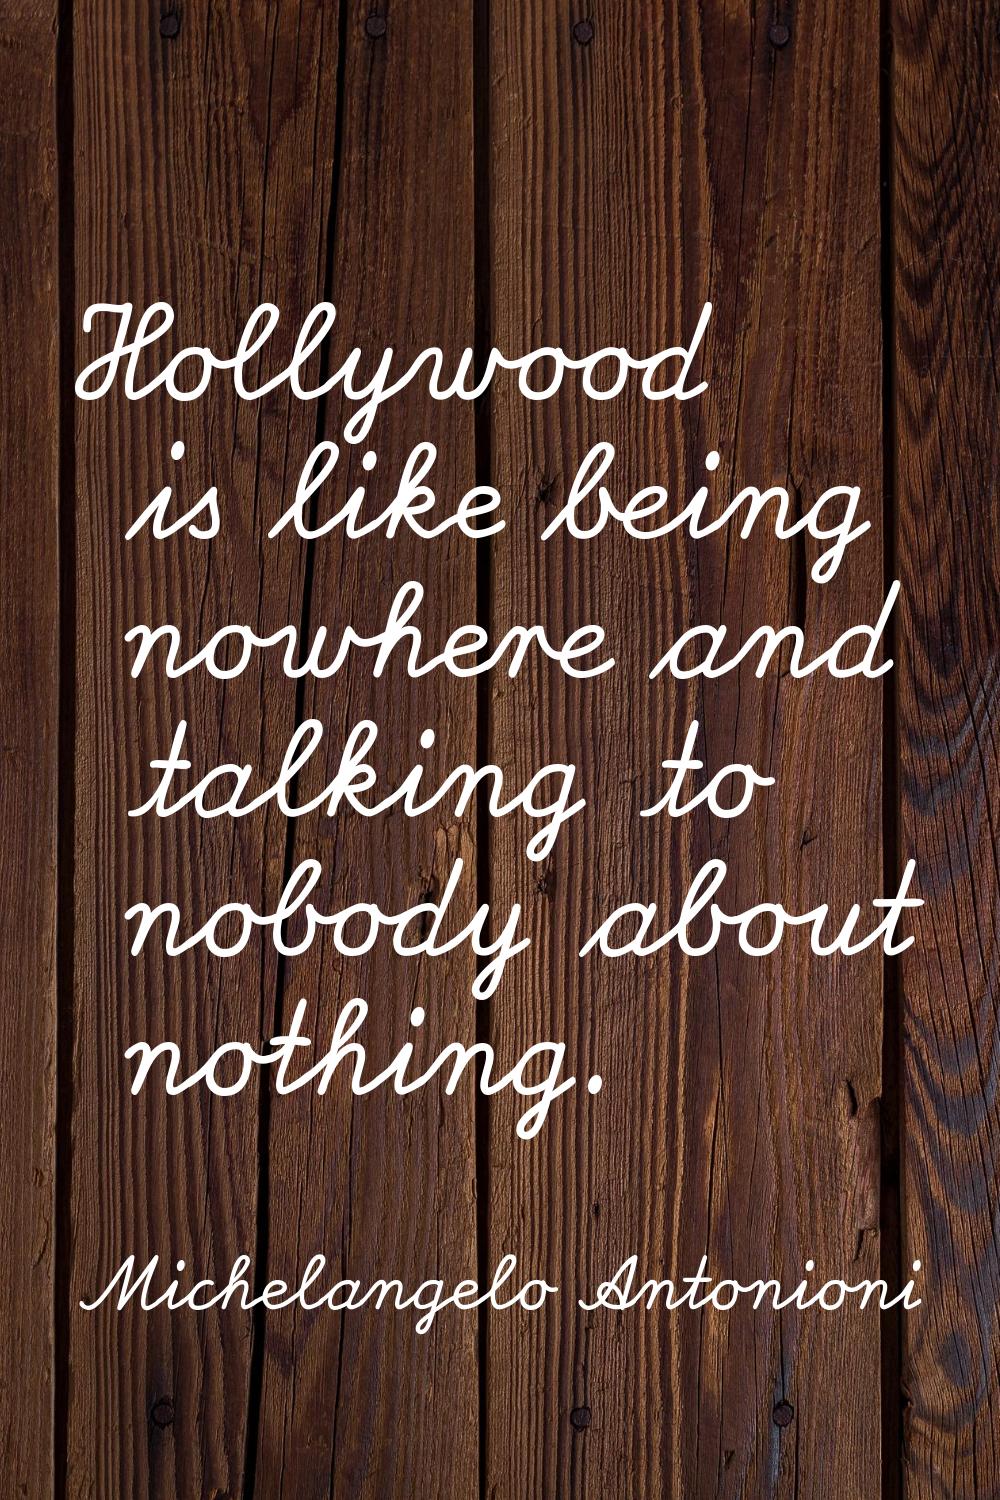 Hollywood is like being nowhere and talking to nobody about nothing.